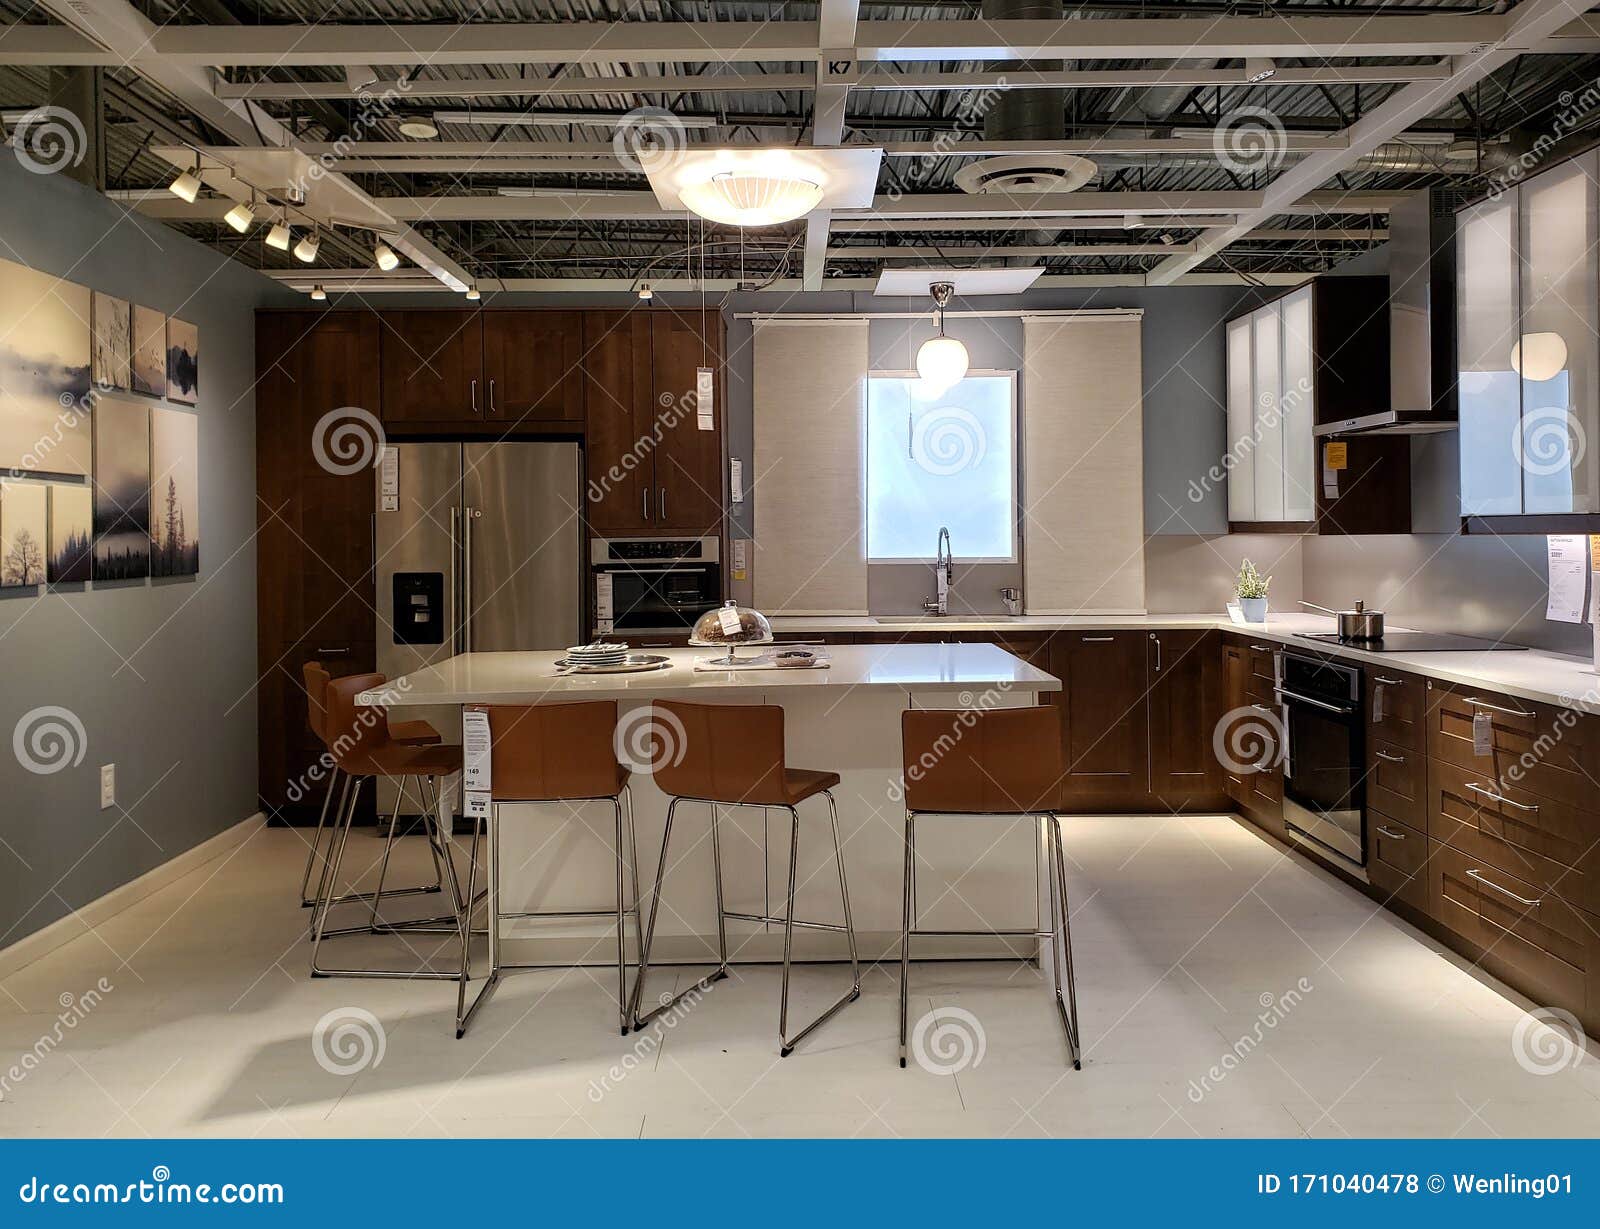 Nice Modern Kitchen At Store Ikea Editorial Stock Photo Image Of Lifestyle Arranged 171040478